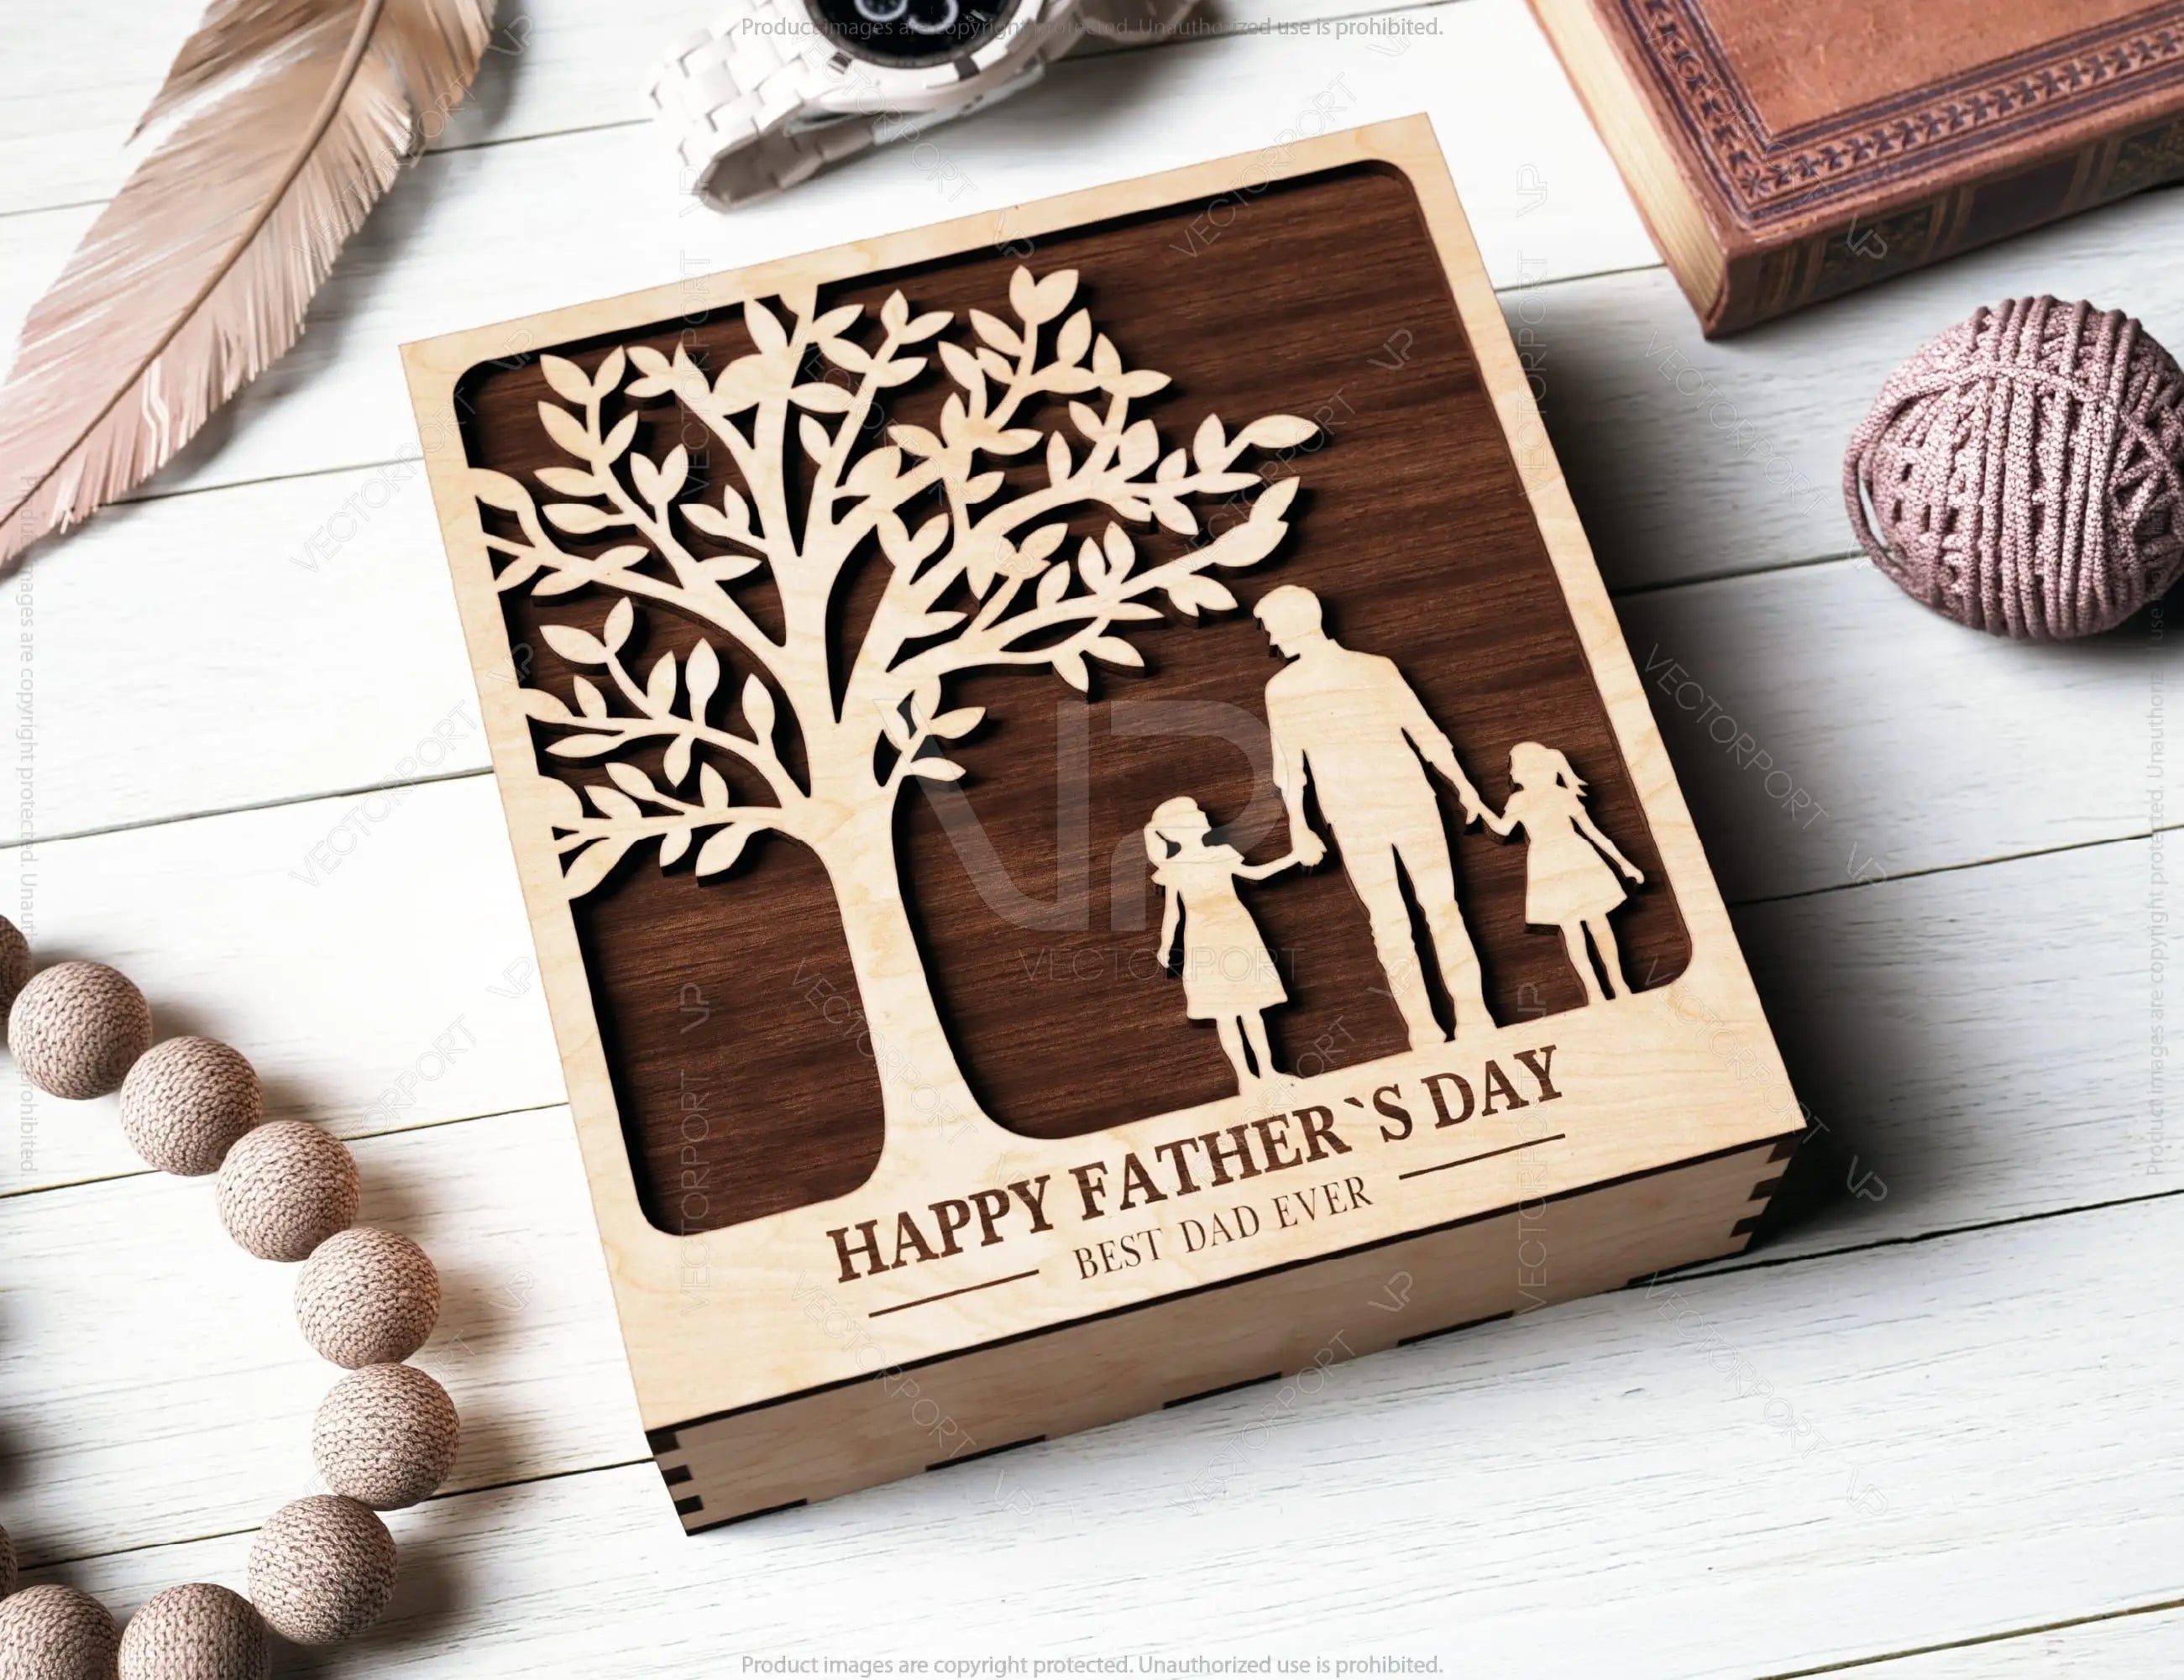 Father's Day engraved Gift Box – Dad & Son/Daughter Themed laser cut SVG Template, Card Case Favor Box Digital Downloads |#U423|